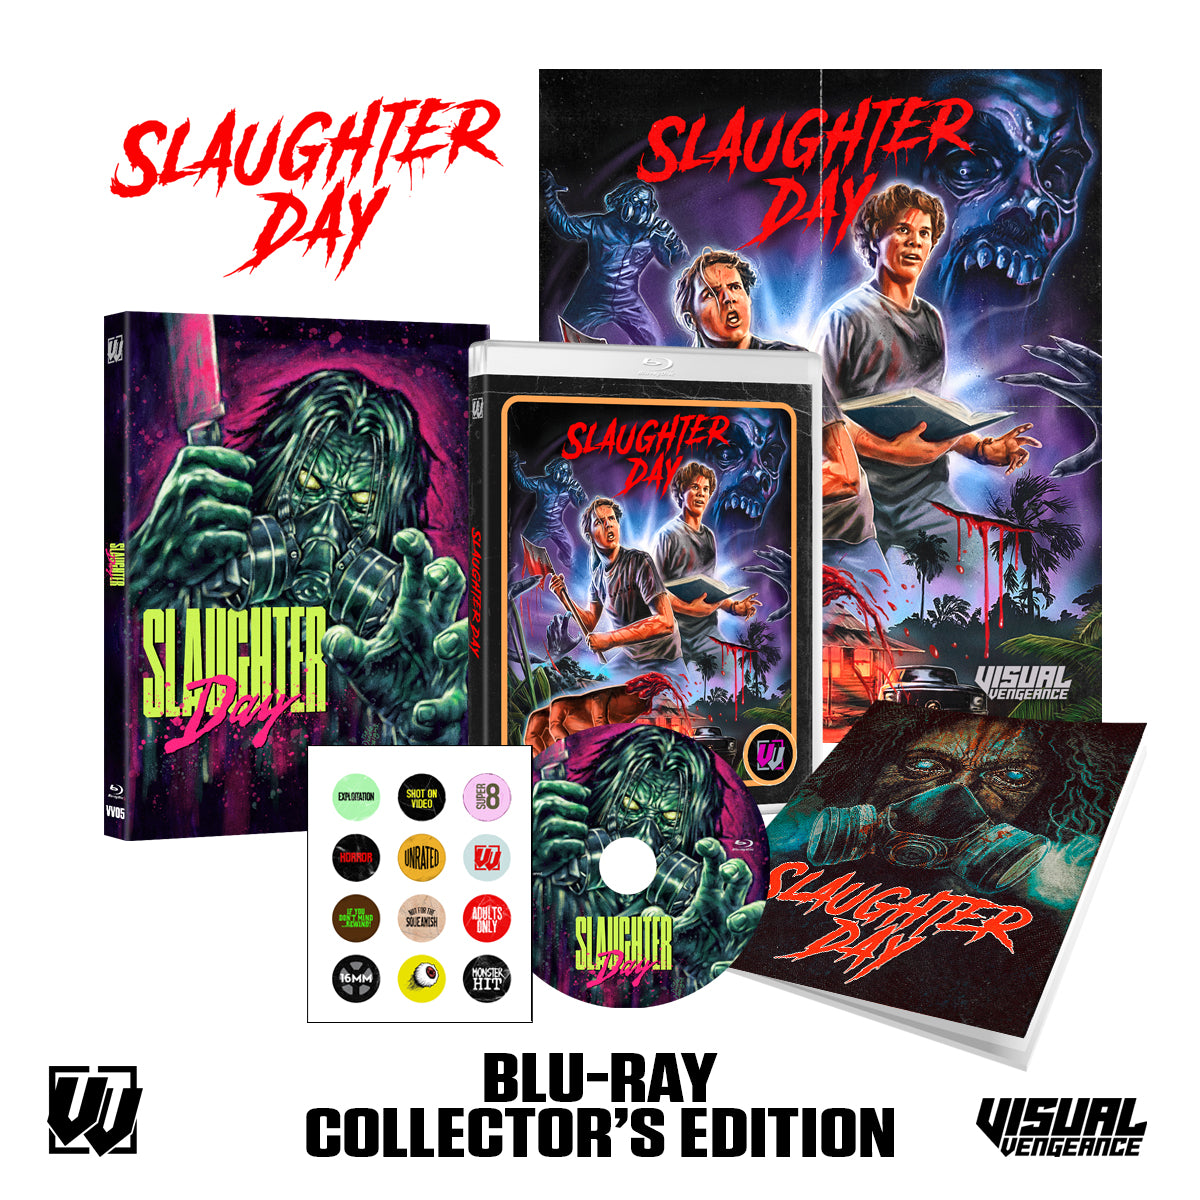 SLAUGHTER DAY BLU-RAY